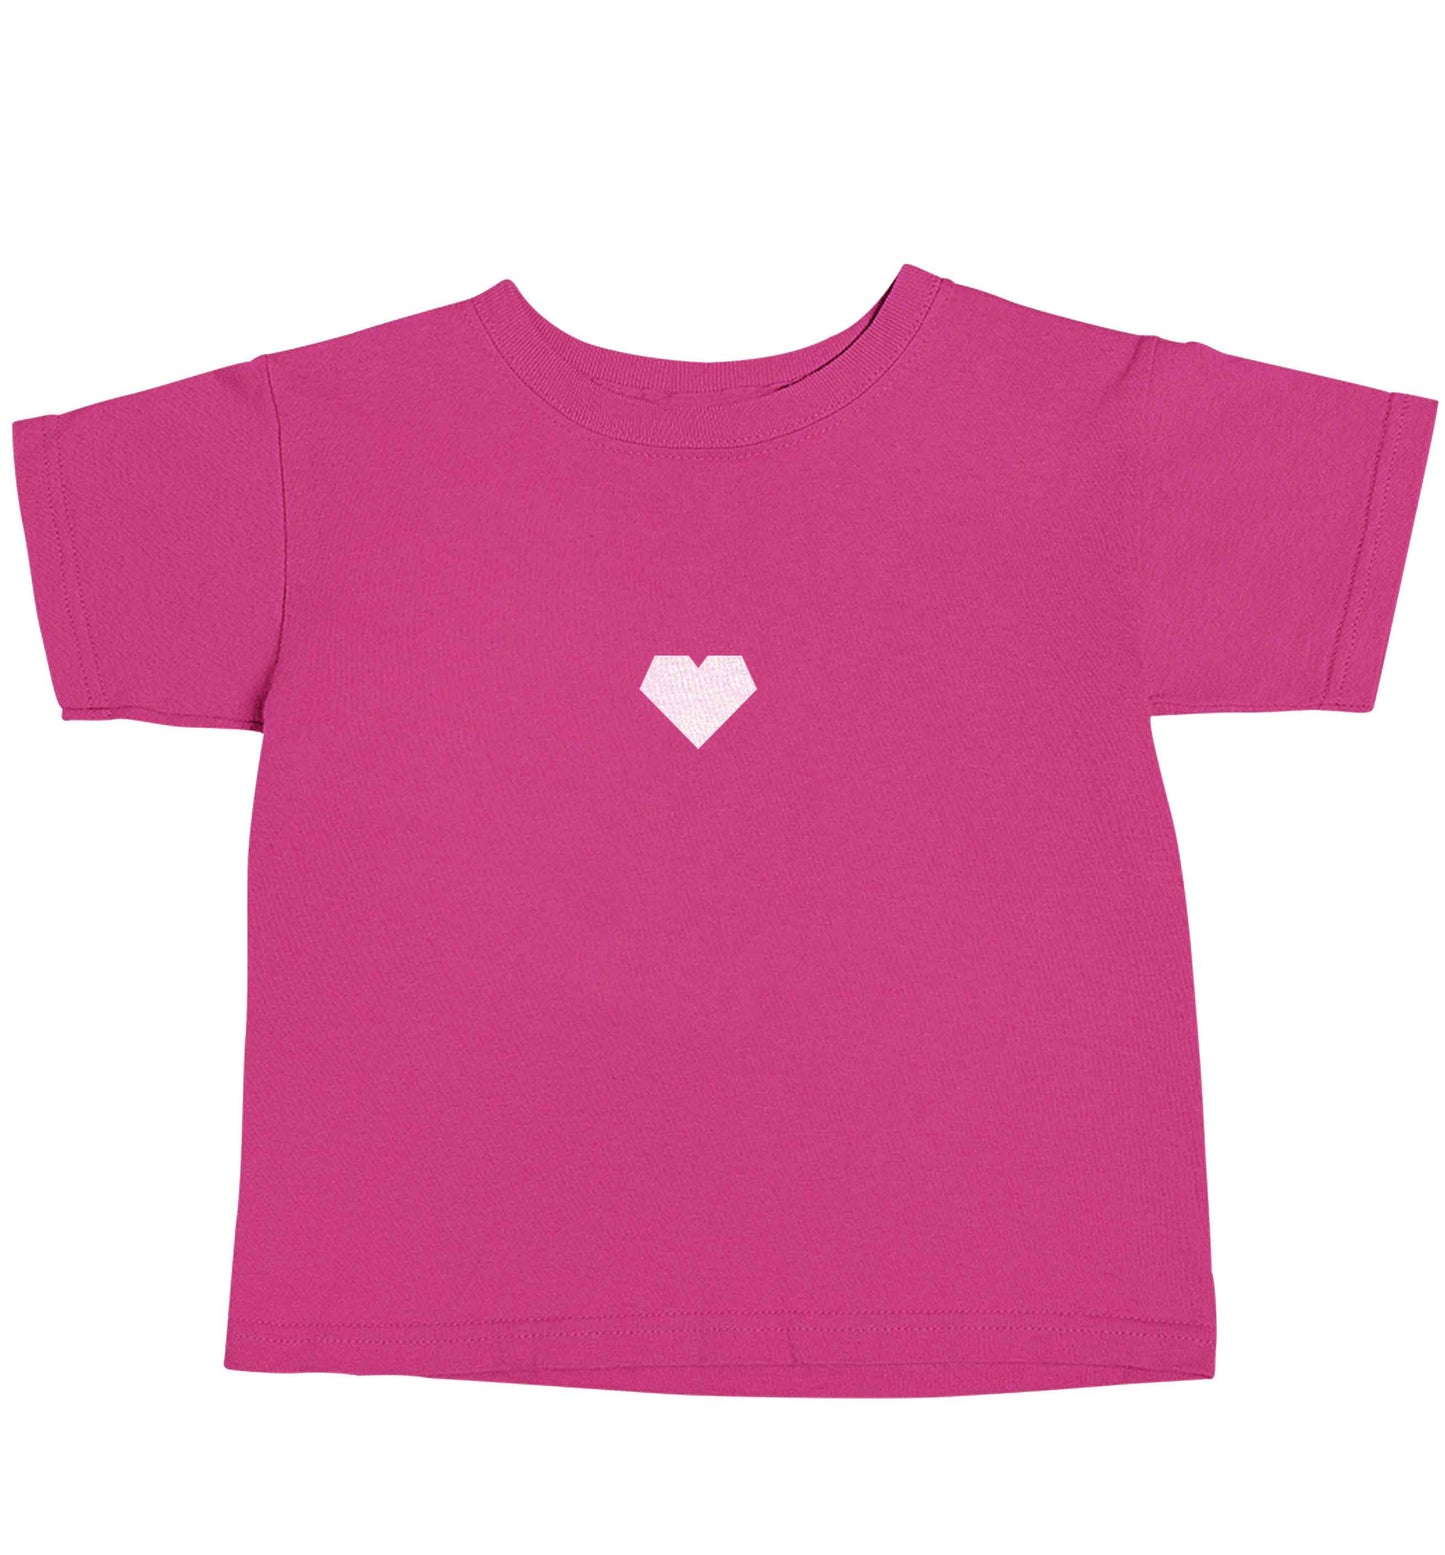 Tiny heart pink baby toddler Tshirt 2 Years